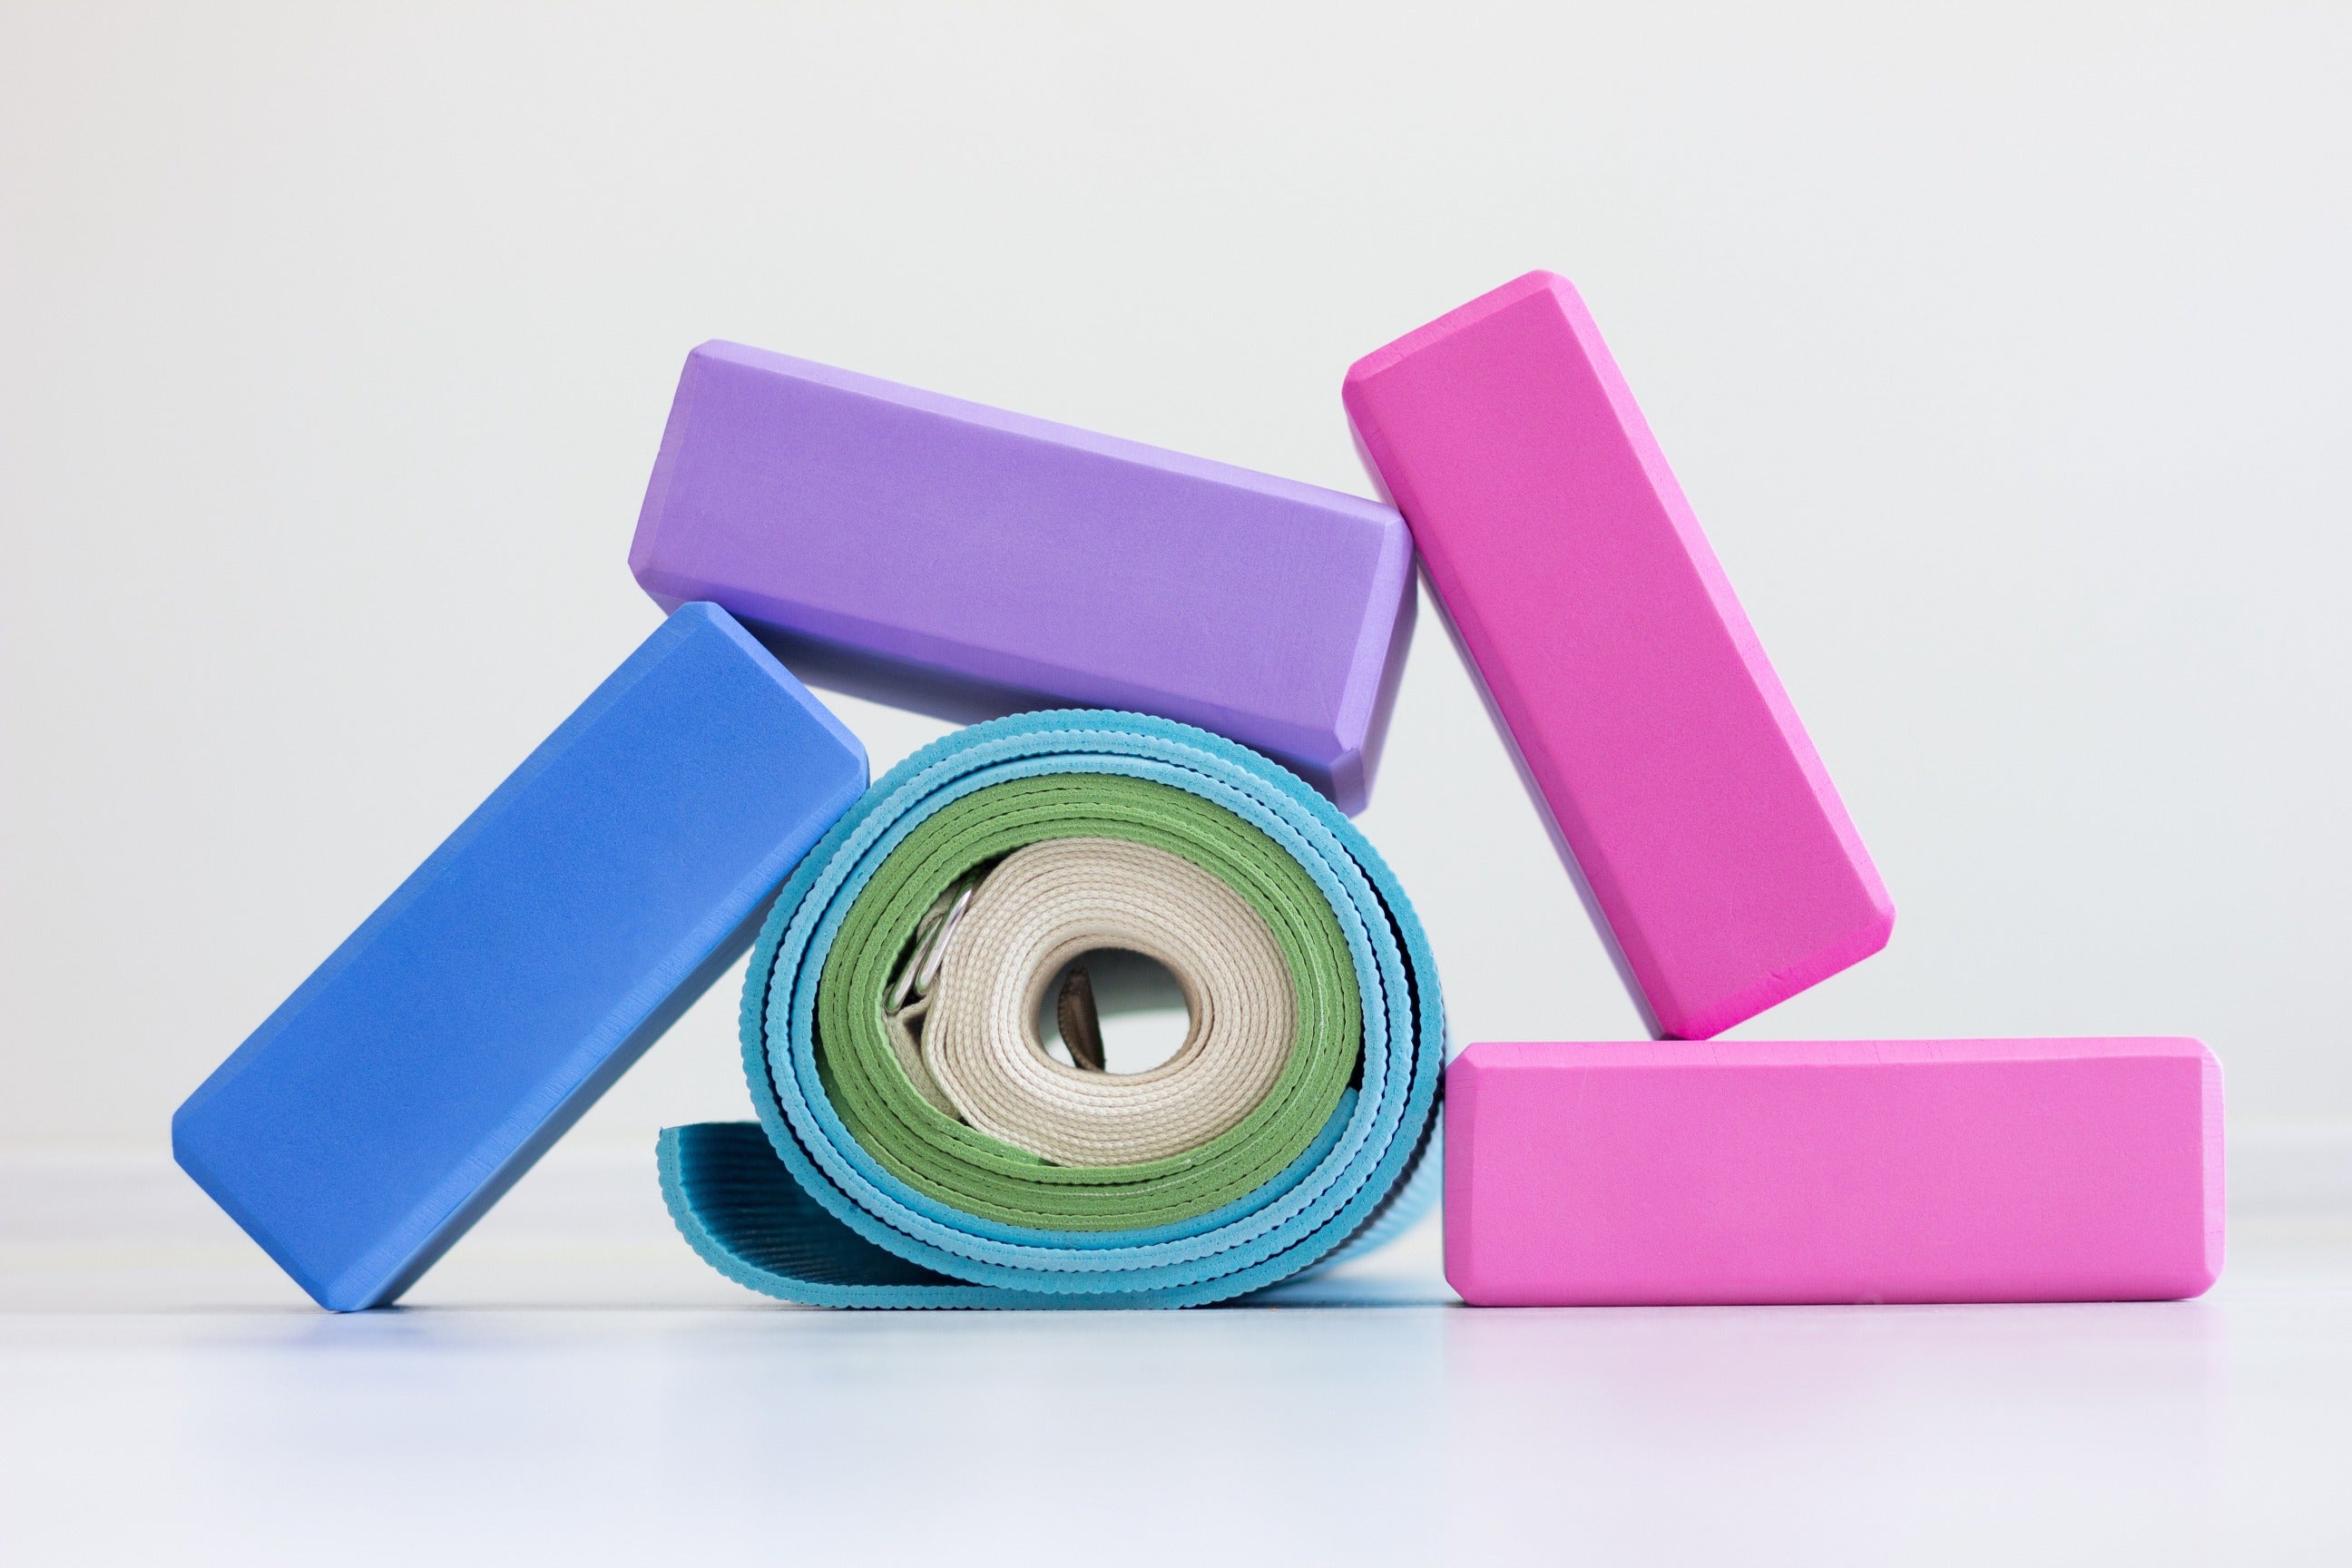 How to Use Yoga Blocks in Your Existing Routine